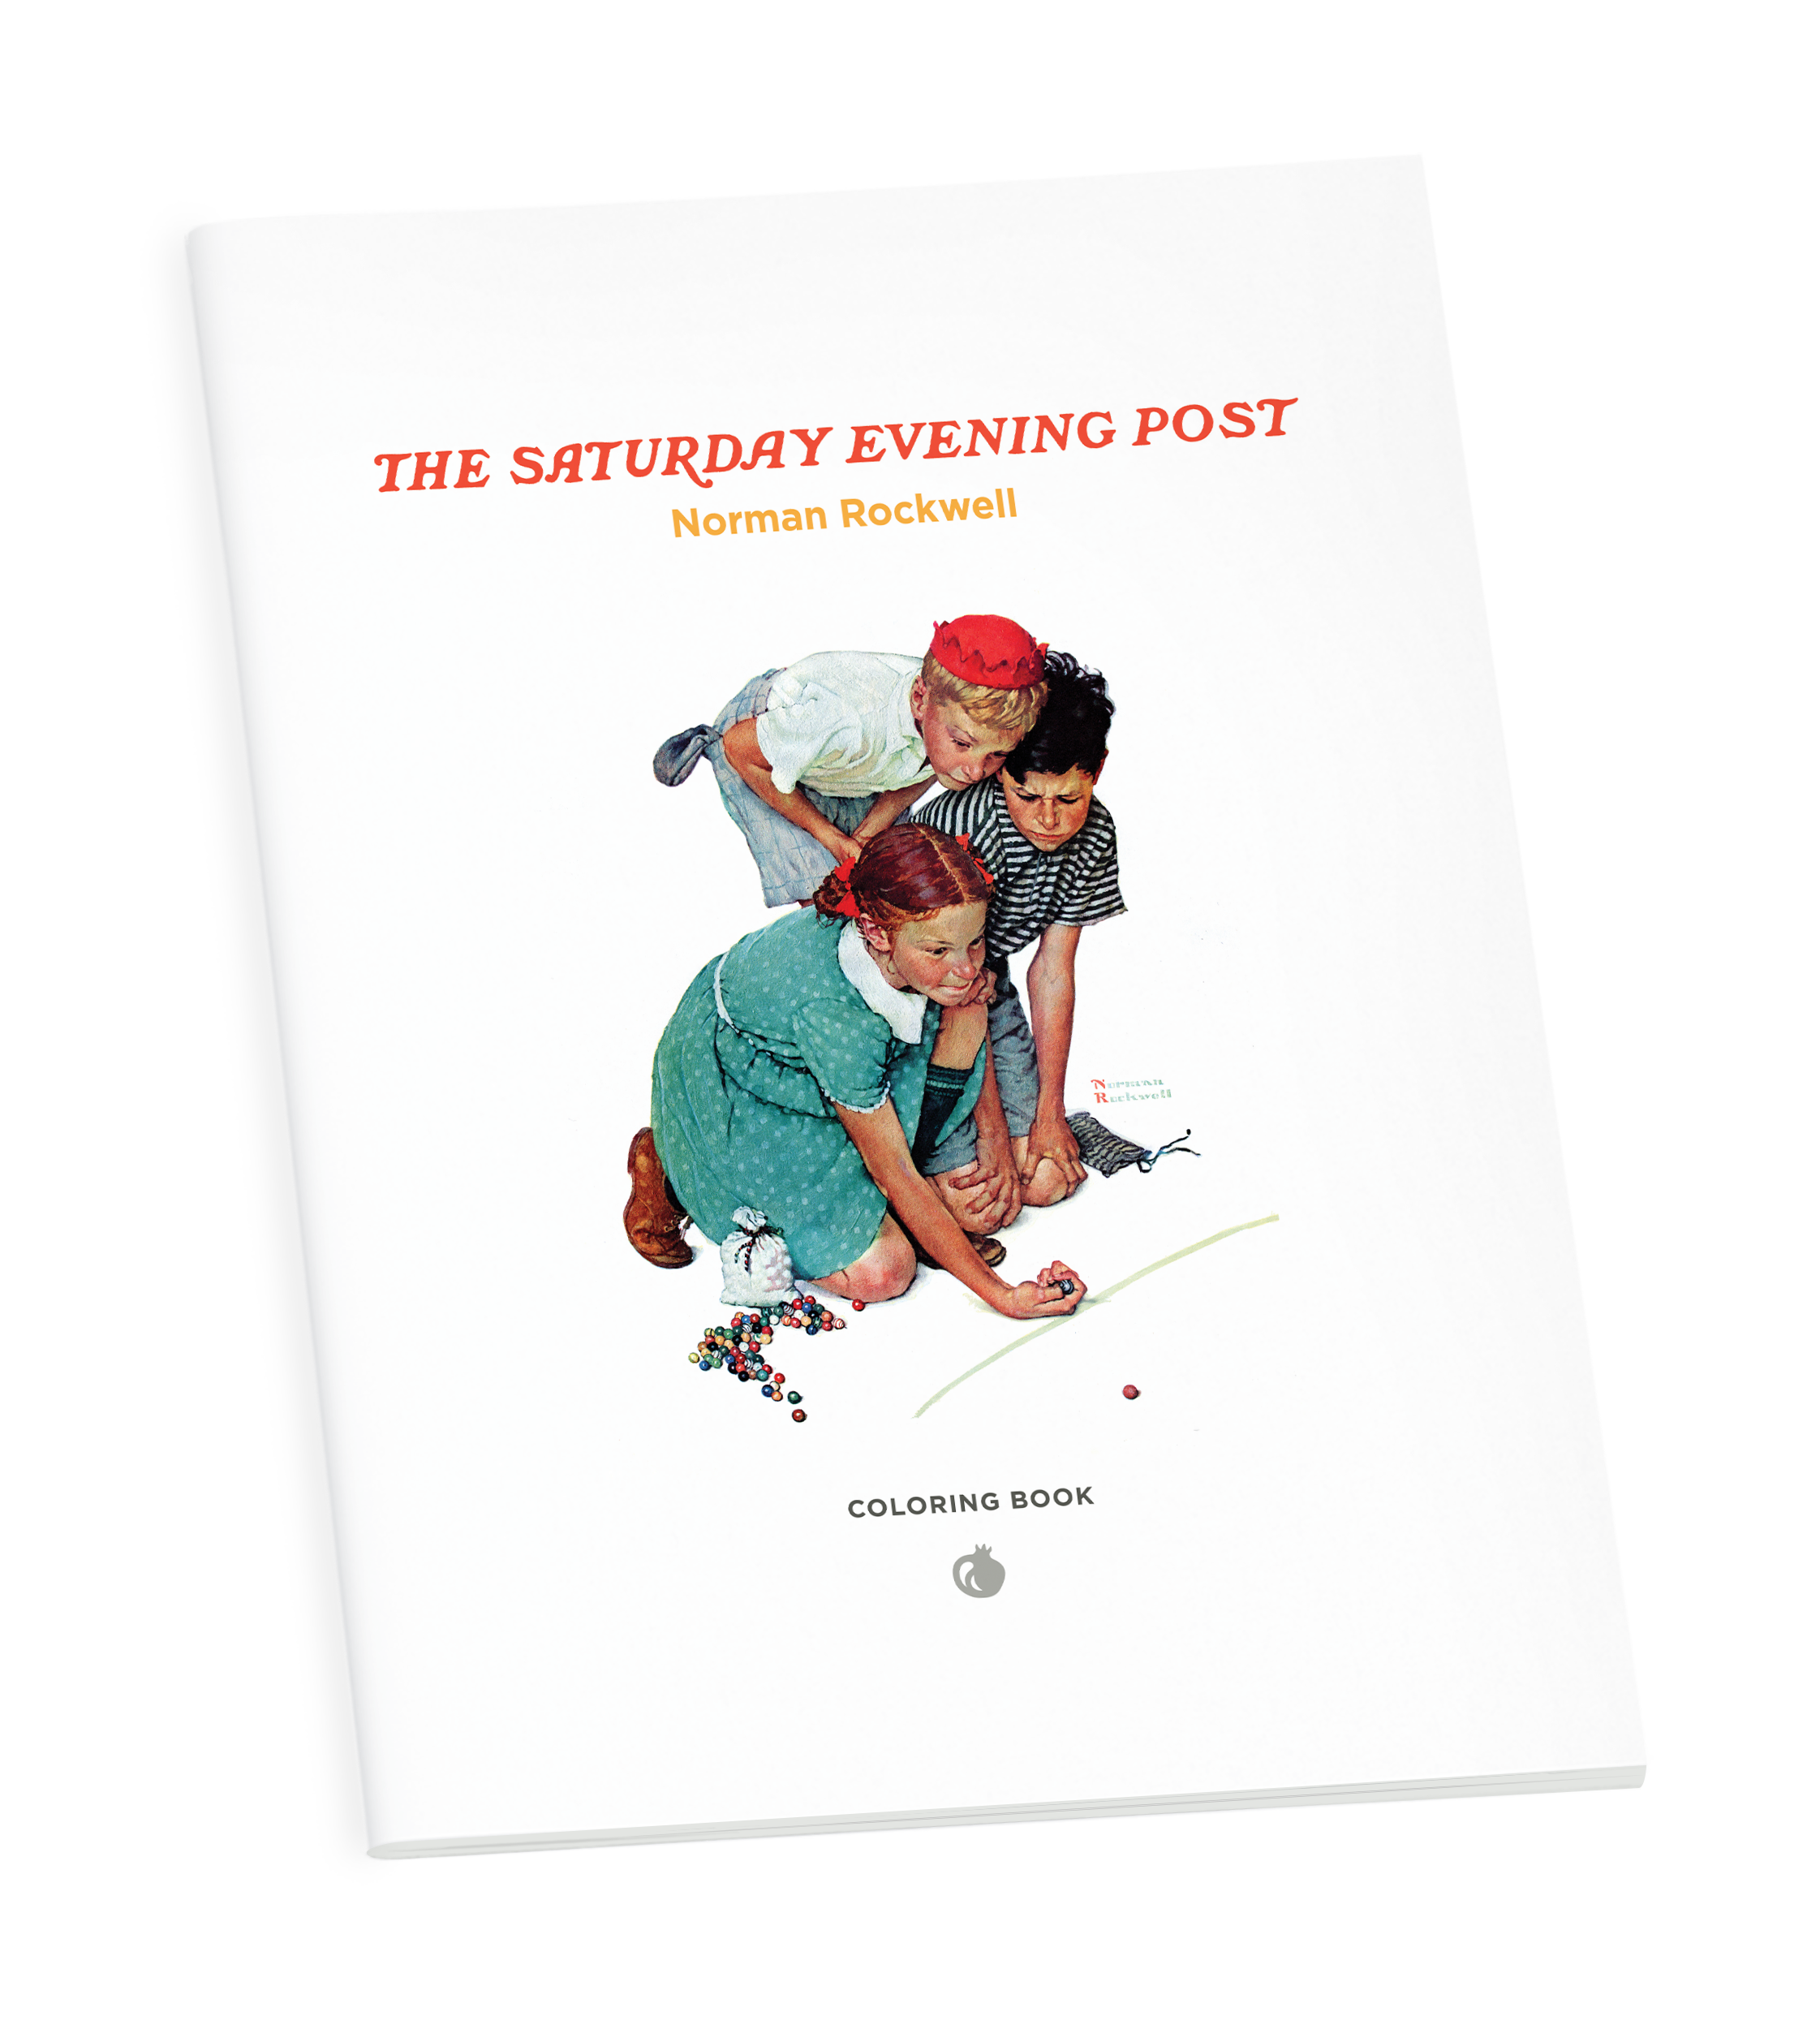 The Saturday Evening Post Norman Rockwell Coloring Book    